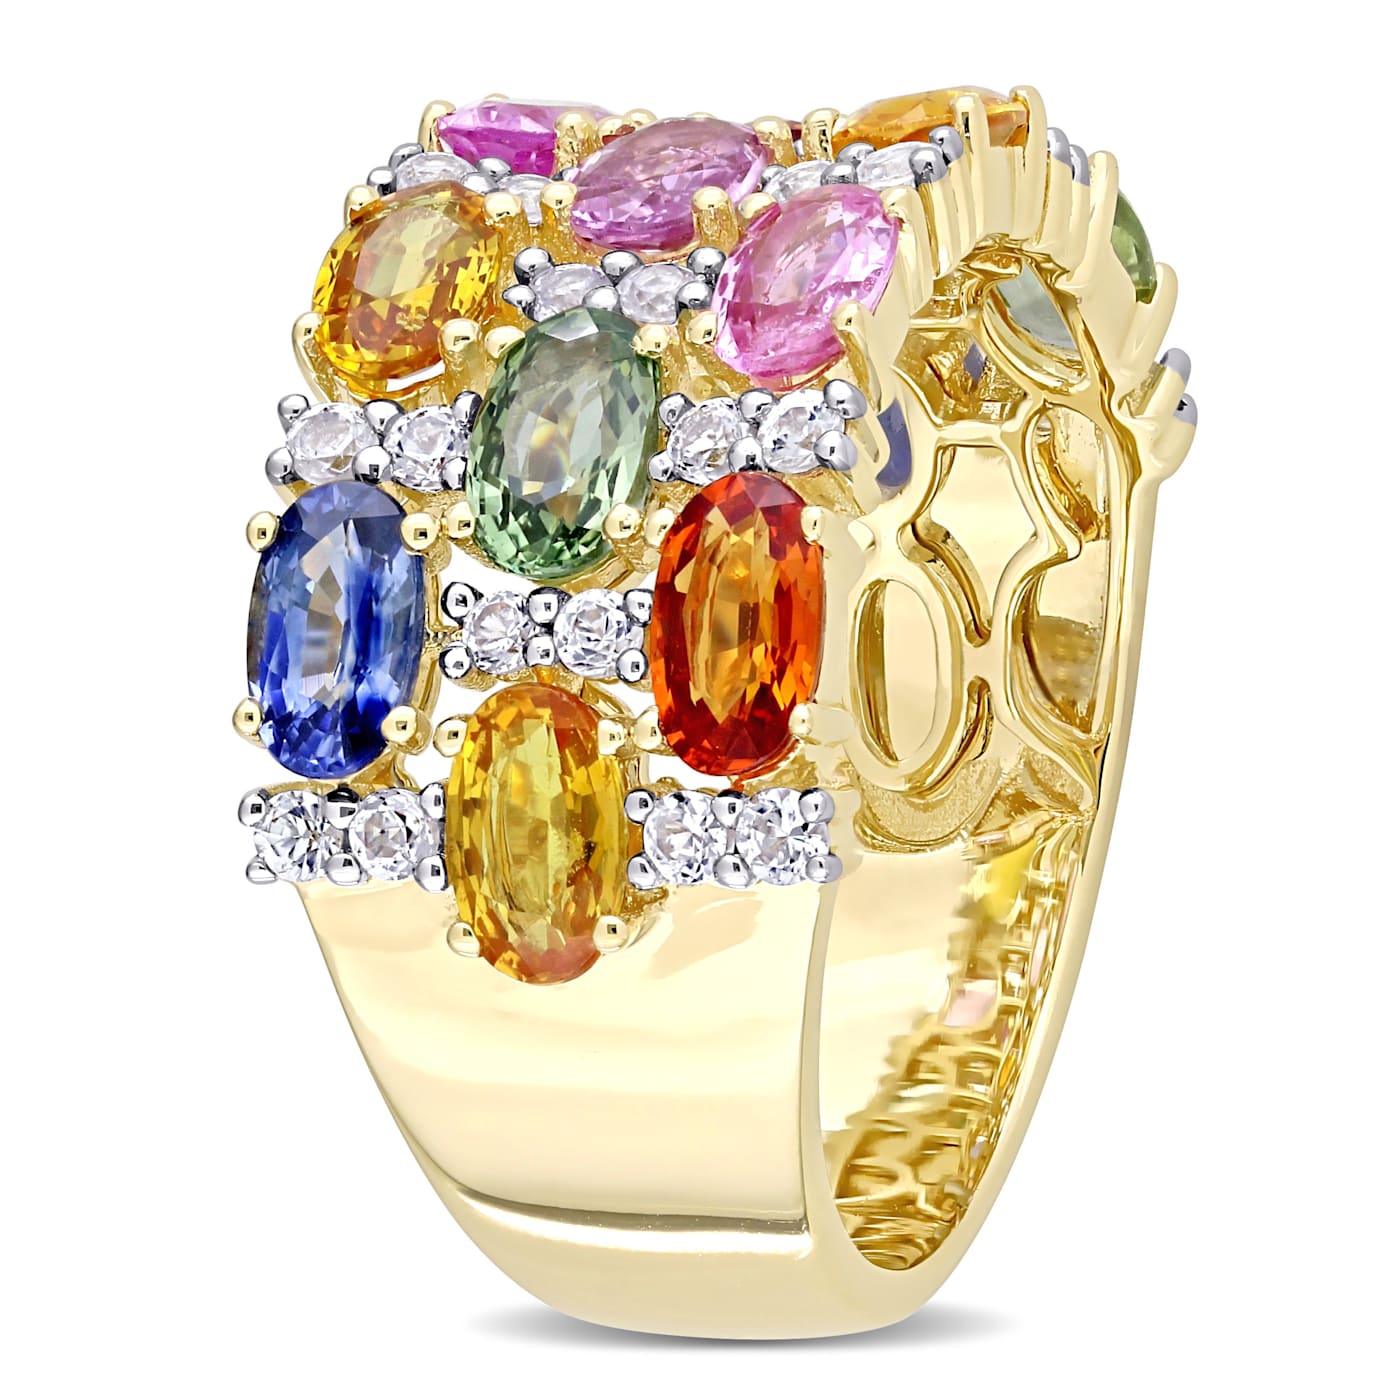 Gemstone Jewelry - 3 3/4 CT TGW Multi-Color Sapphire Crisscross Ring in 14k  Yellow Gold - Discounts for Veterans, VA employees and their families!